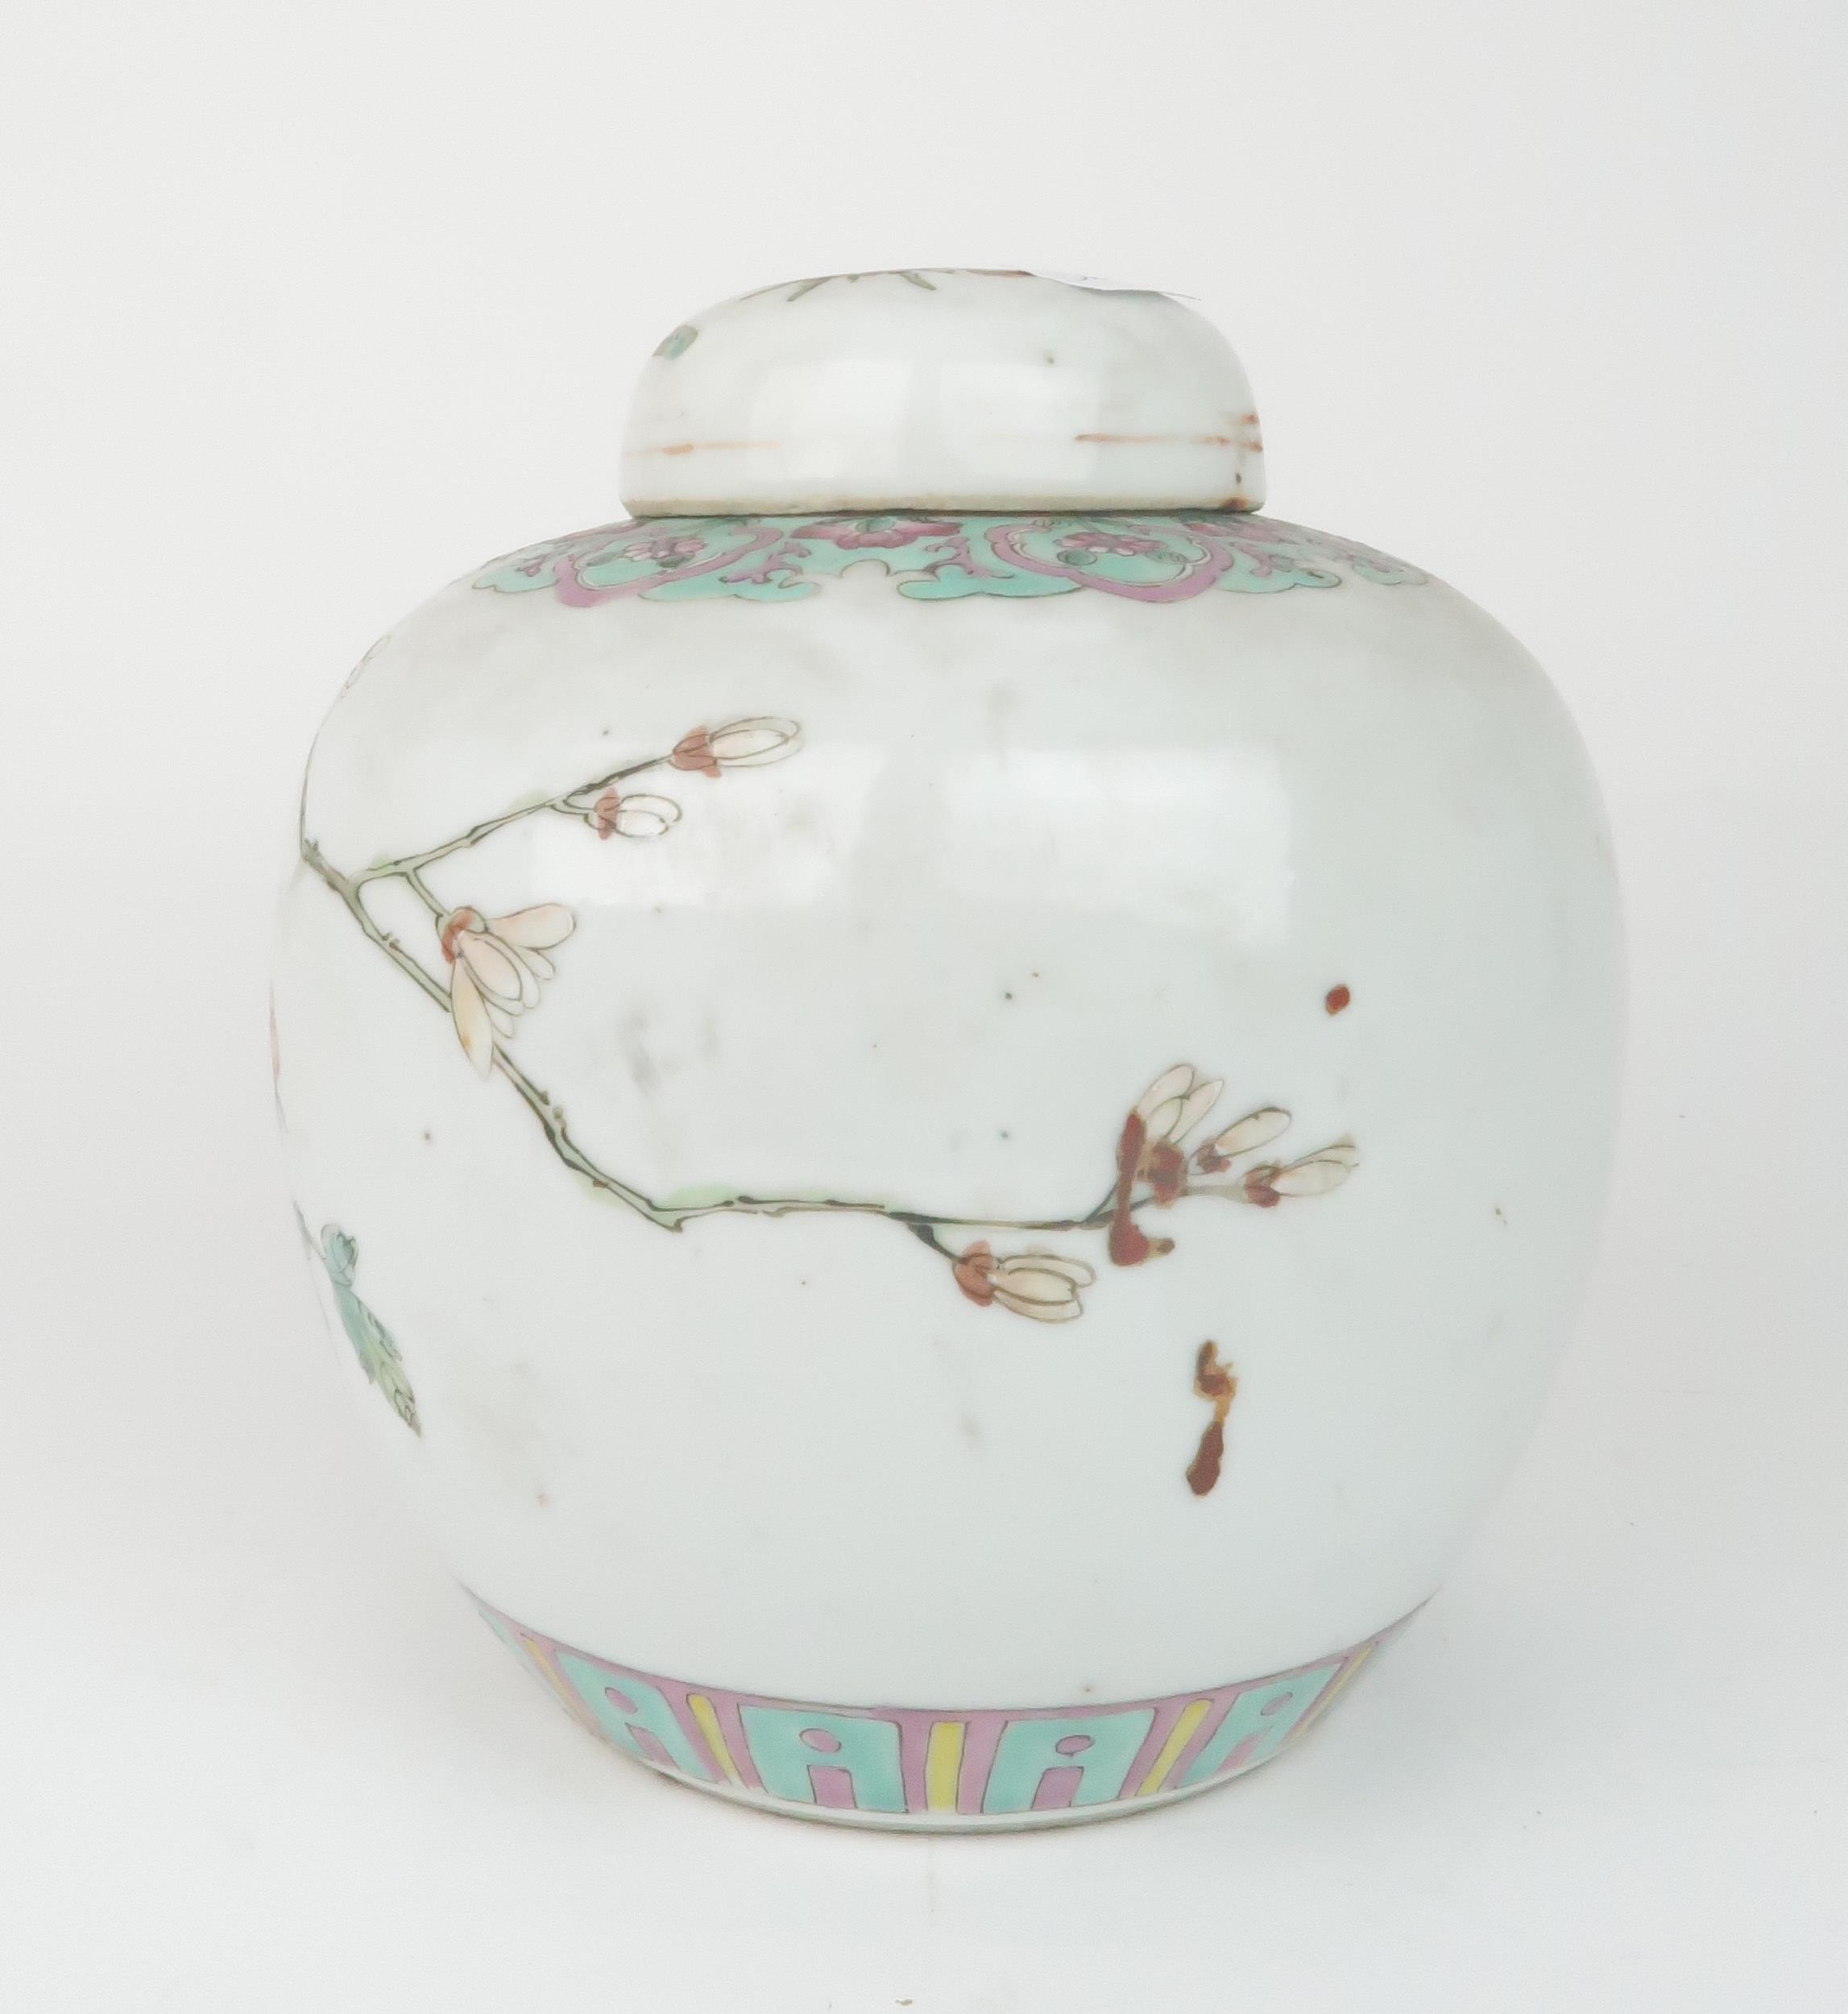 A CHINESE FAMILLE ROSE GINGER JAR AND COVER  painted with birds amongst foliage within formal bands, - Image 3 of 6